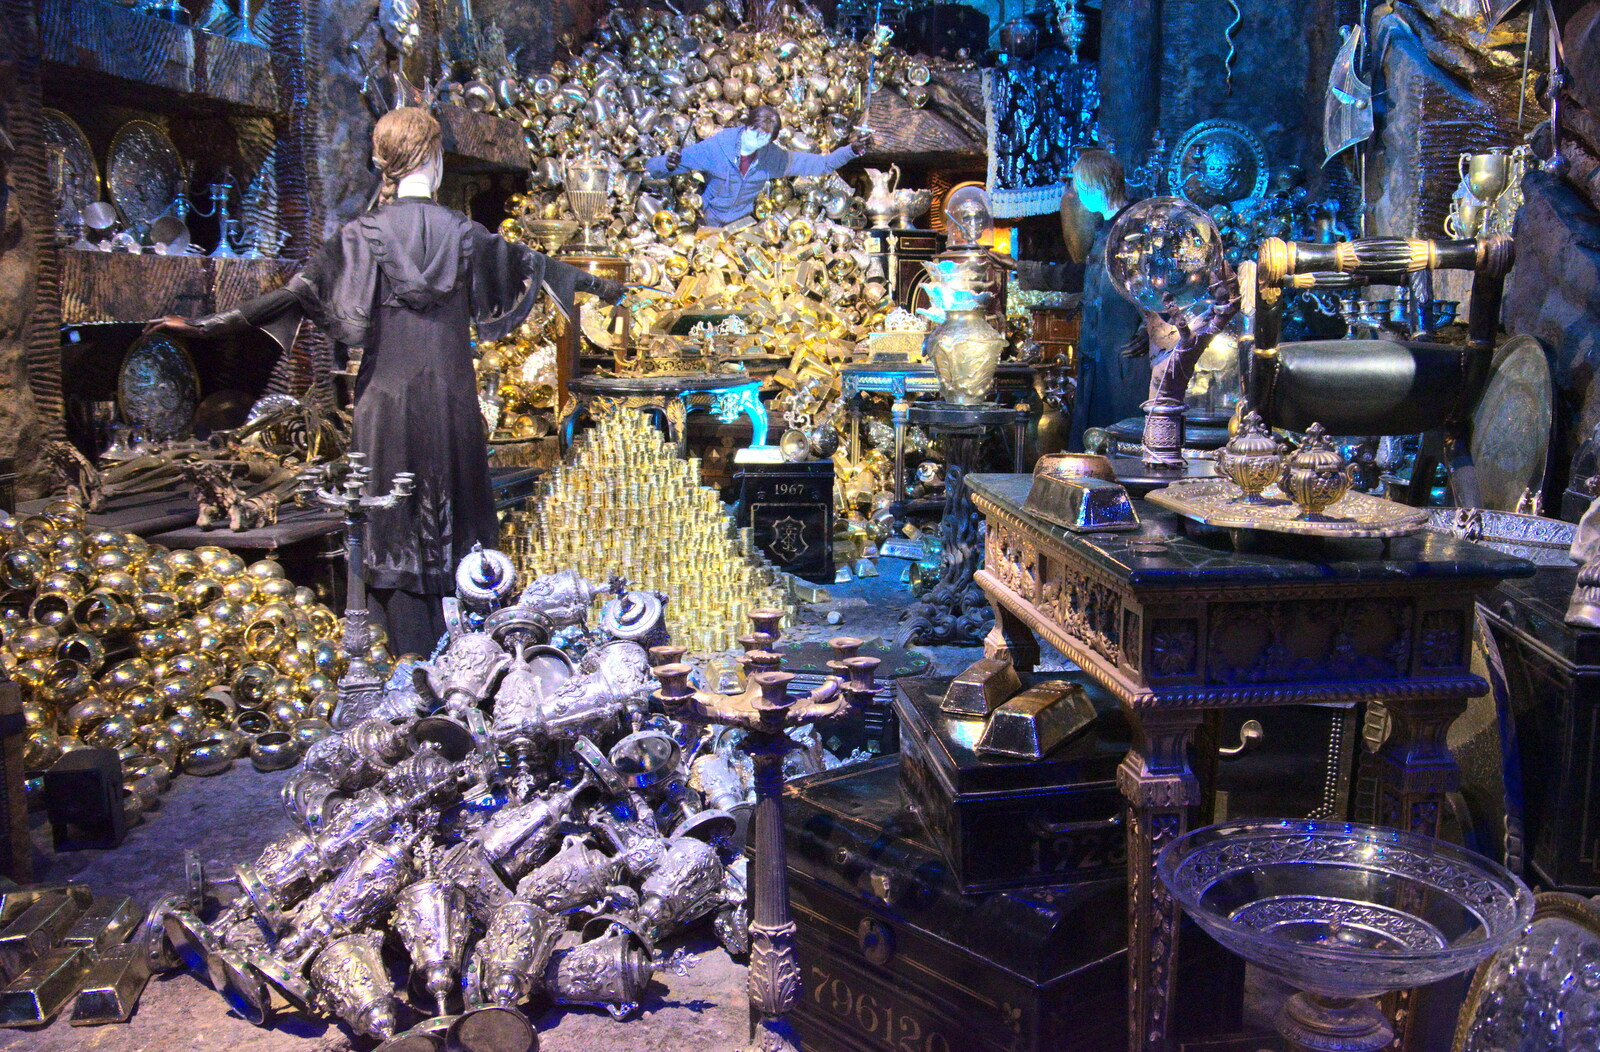 A pile of treasure from A Trip to Harry Potter World, Leavesden, Hertfordshire - 16th February 2020